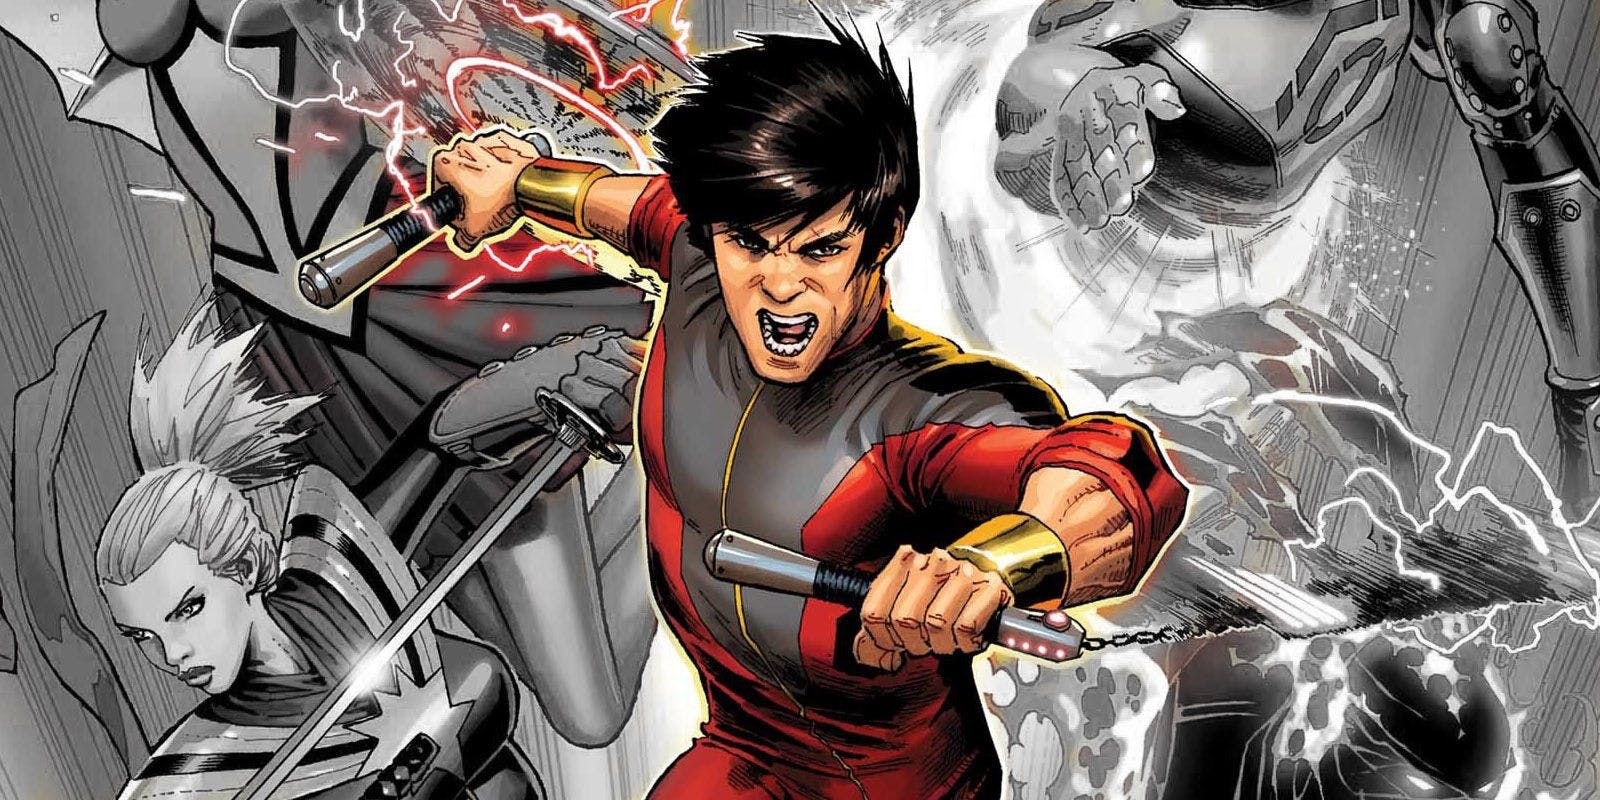 Chinese social media has been full of speculation about which actors of Chinese heritage Marvel Studios is casting to play the new hero character, Shang-Chi, in the film of the same name. Photo: Weibo